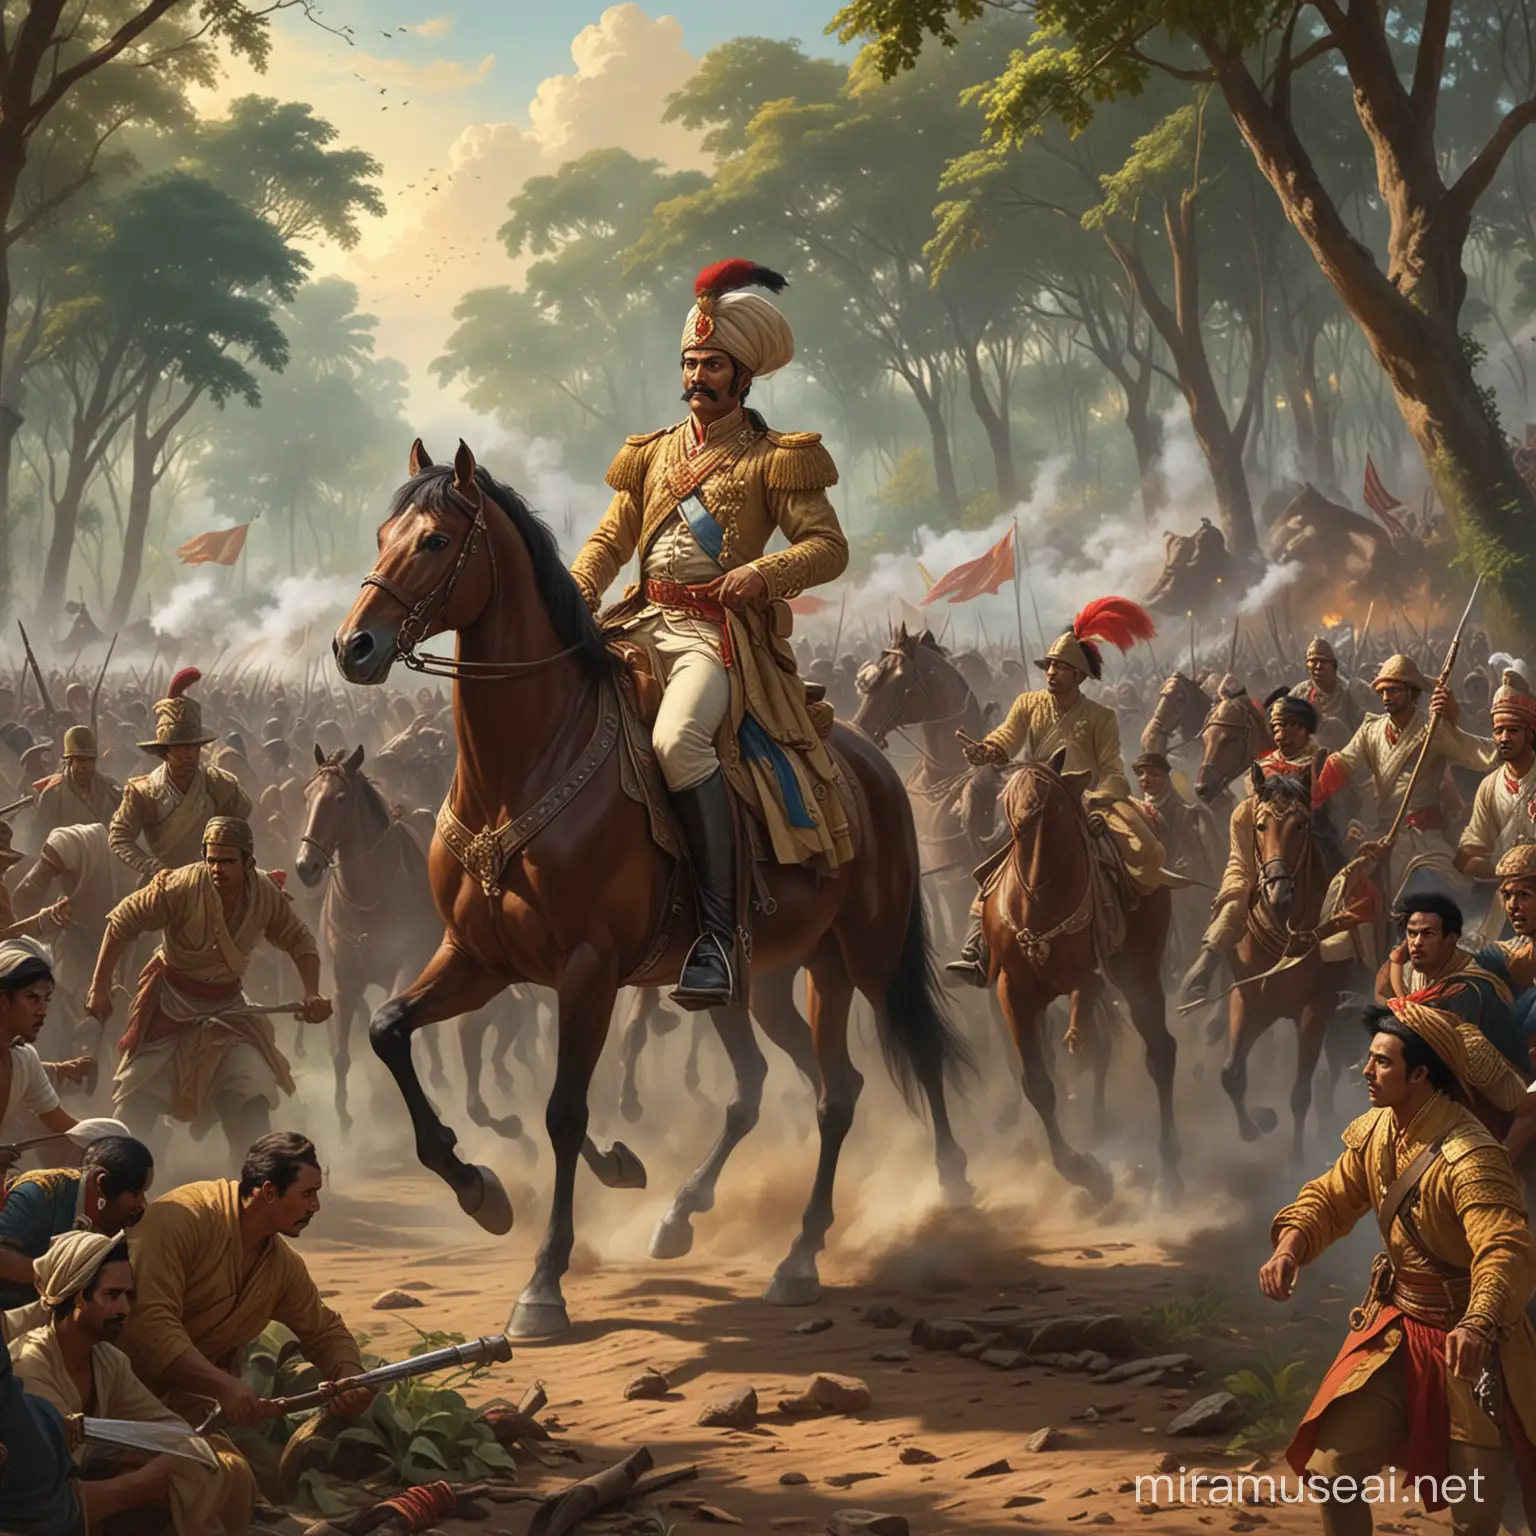 A triumphant scene as the combined forces of Prince Diponegoro and his secret allies drive back the colonial invaders, marking a turning point in history.